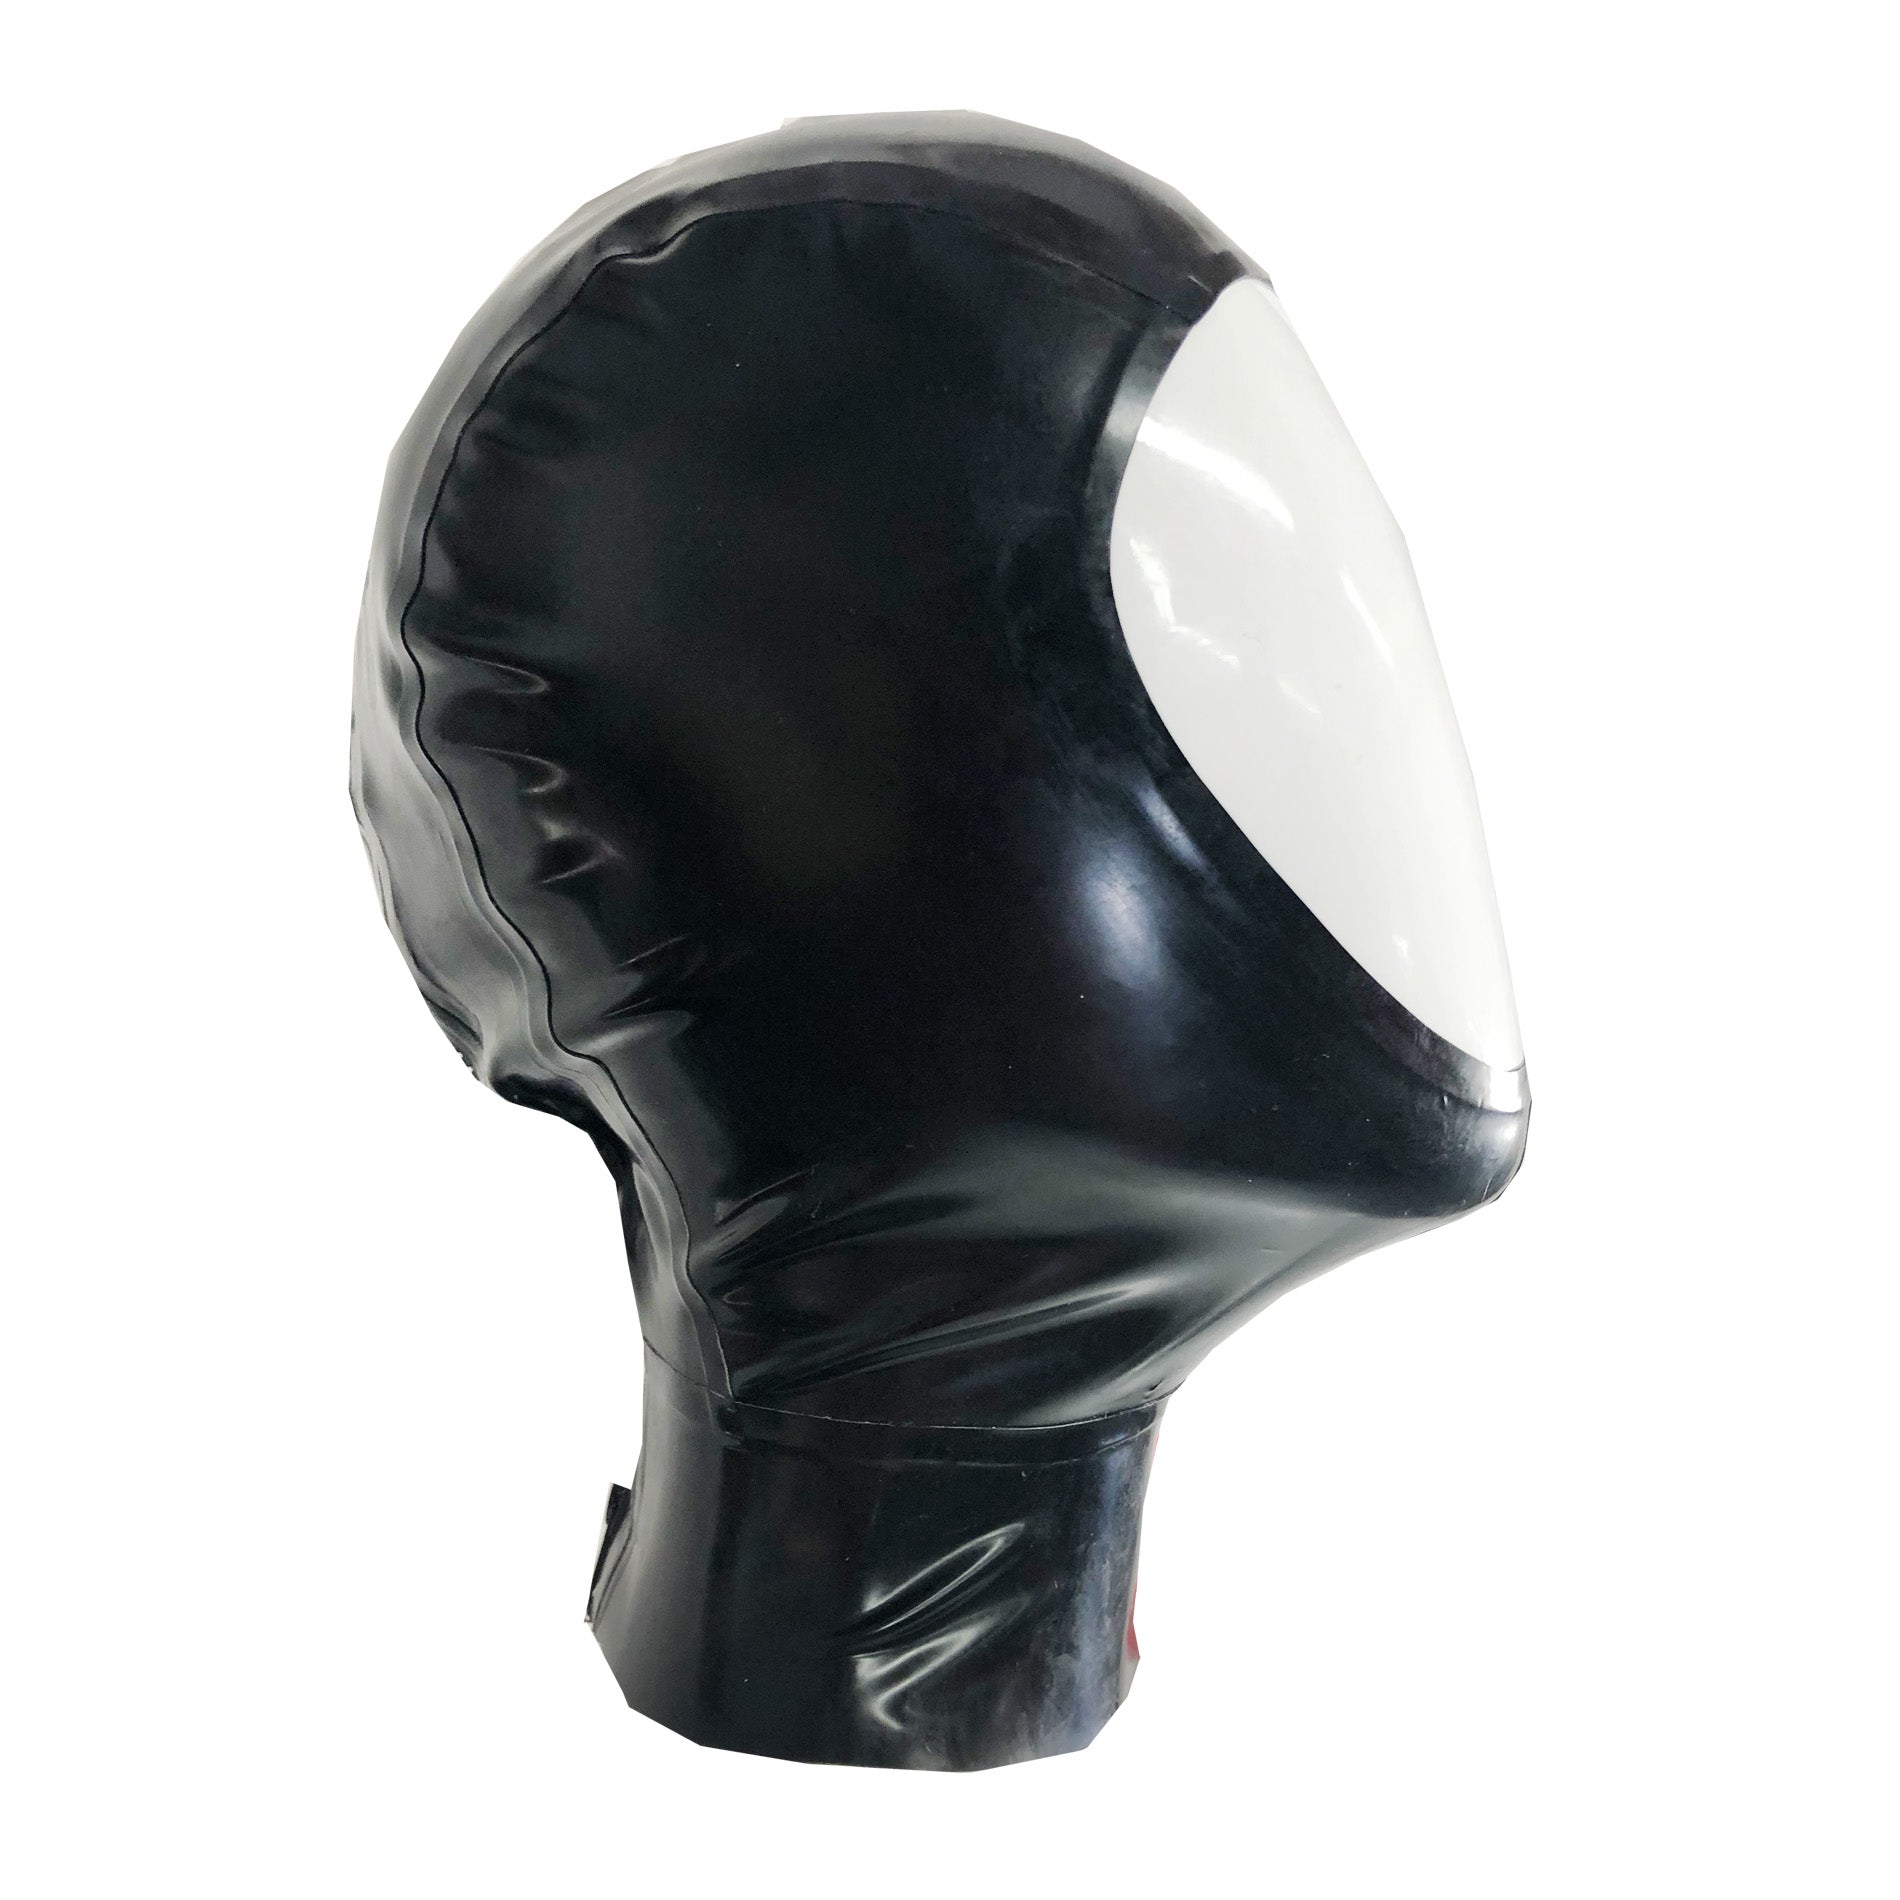 Latex Rubber Fetish Mask By Vex Clothing - Open Face Hood Vex Latex